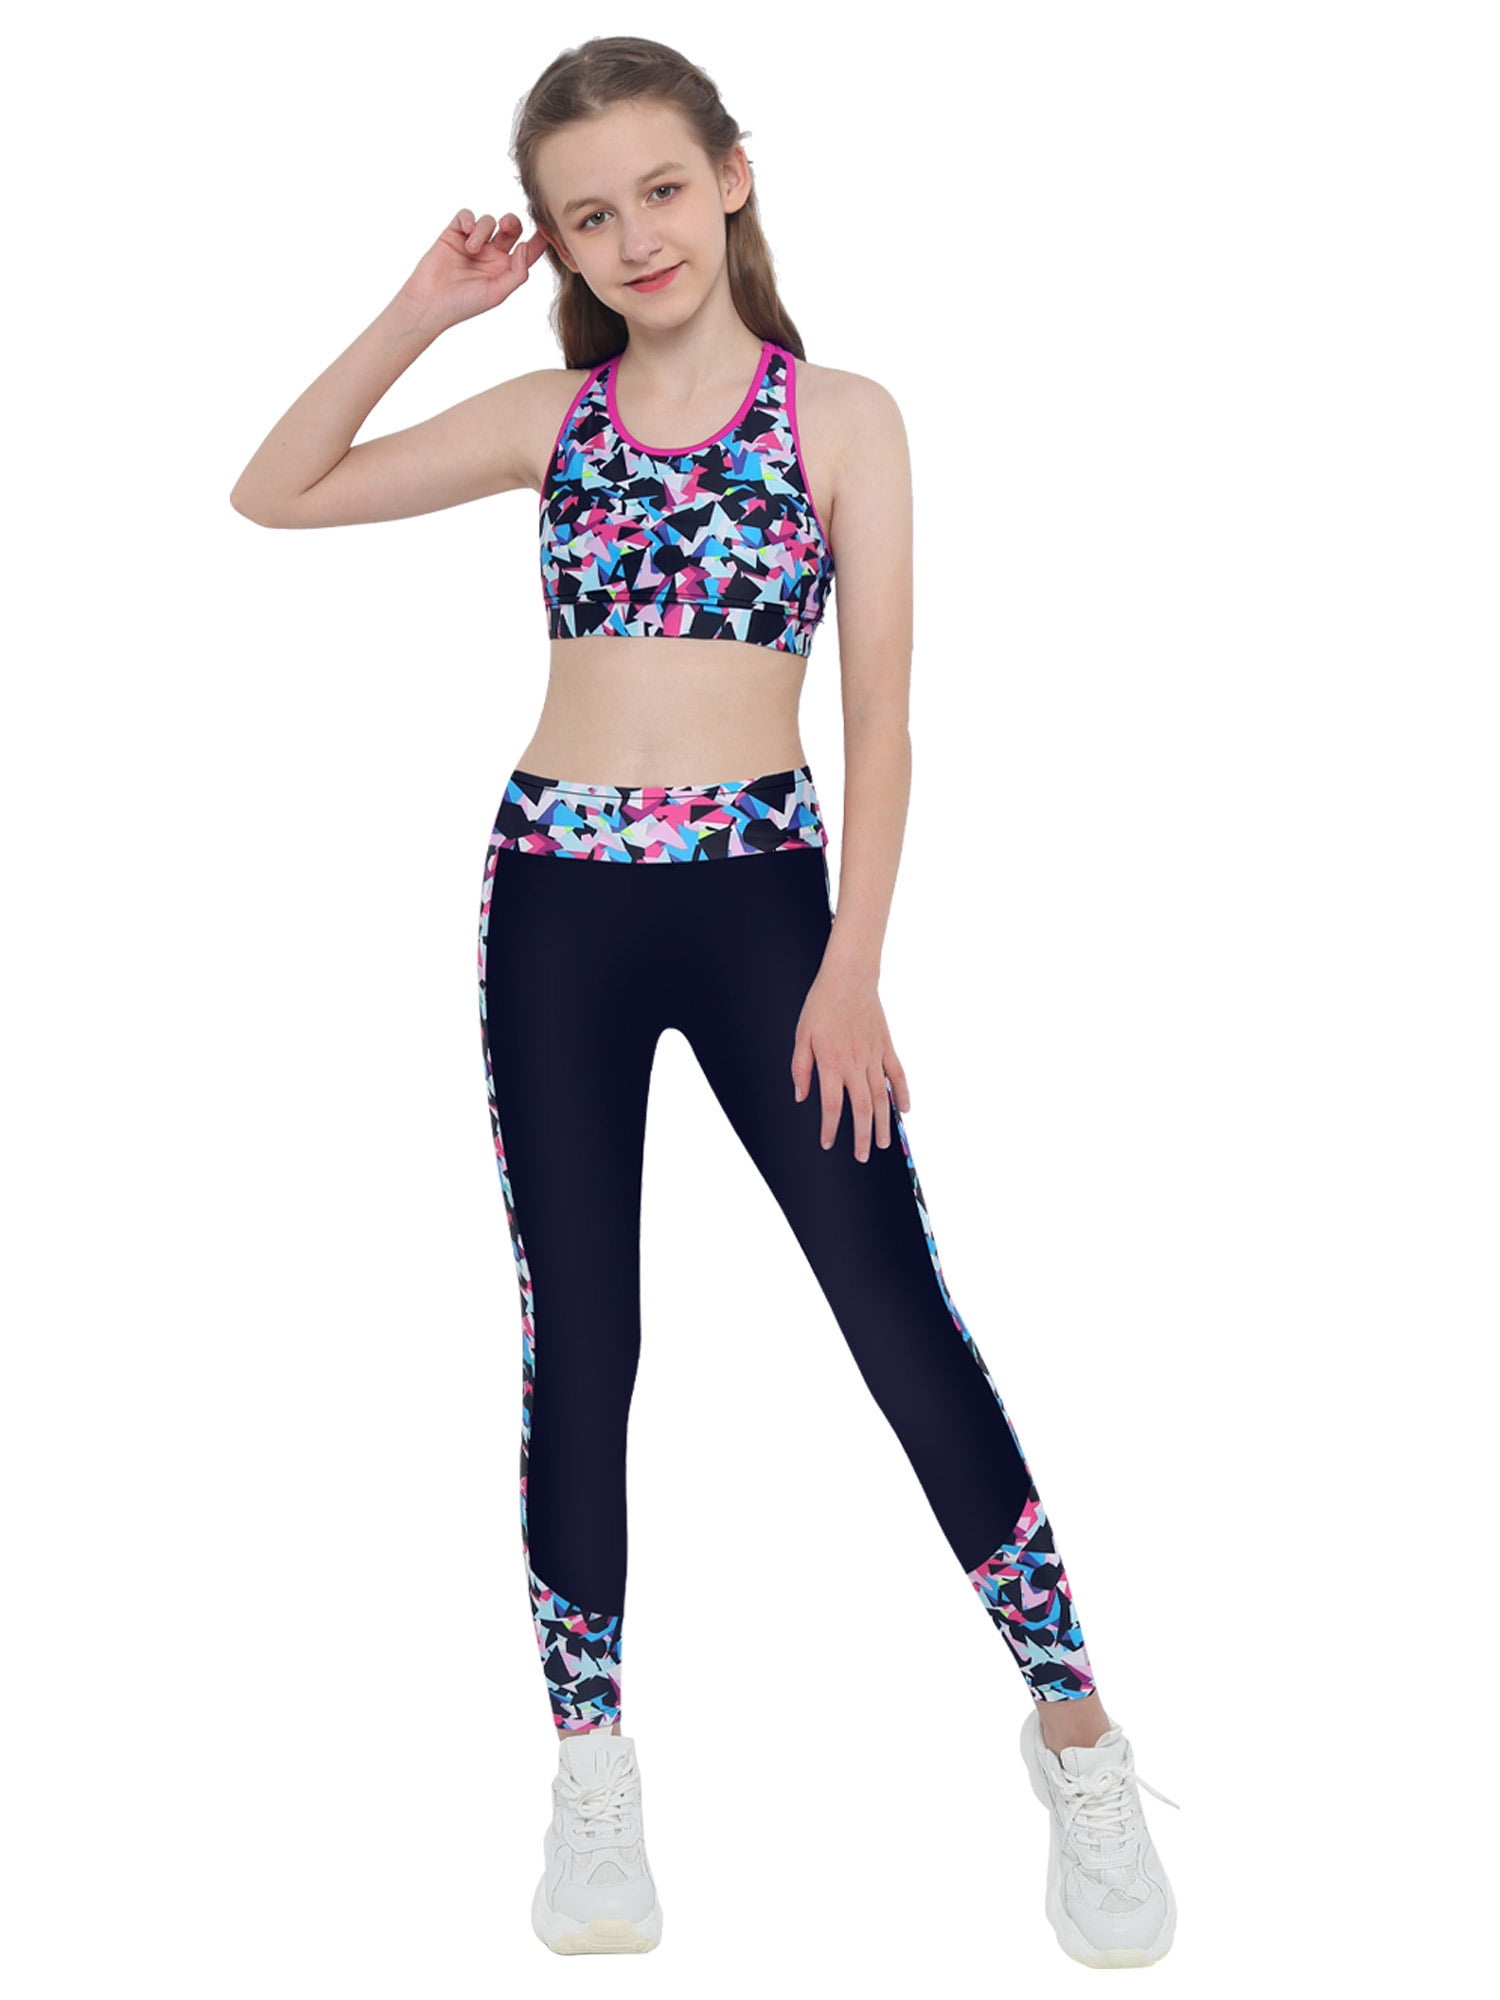 Justice Girls Dance and Gymnastics Tank Top with Built In Bra